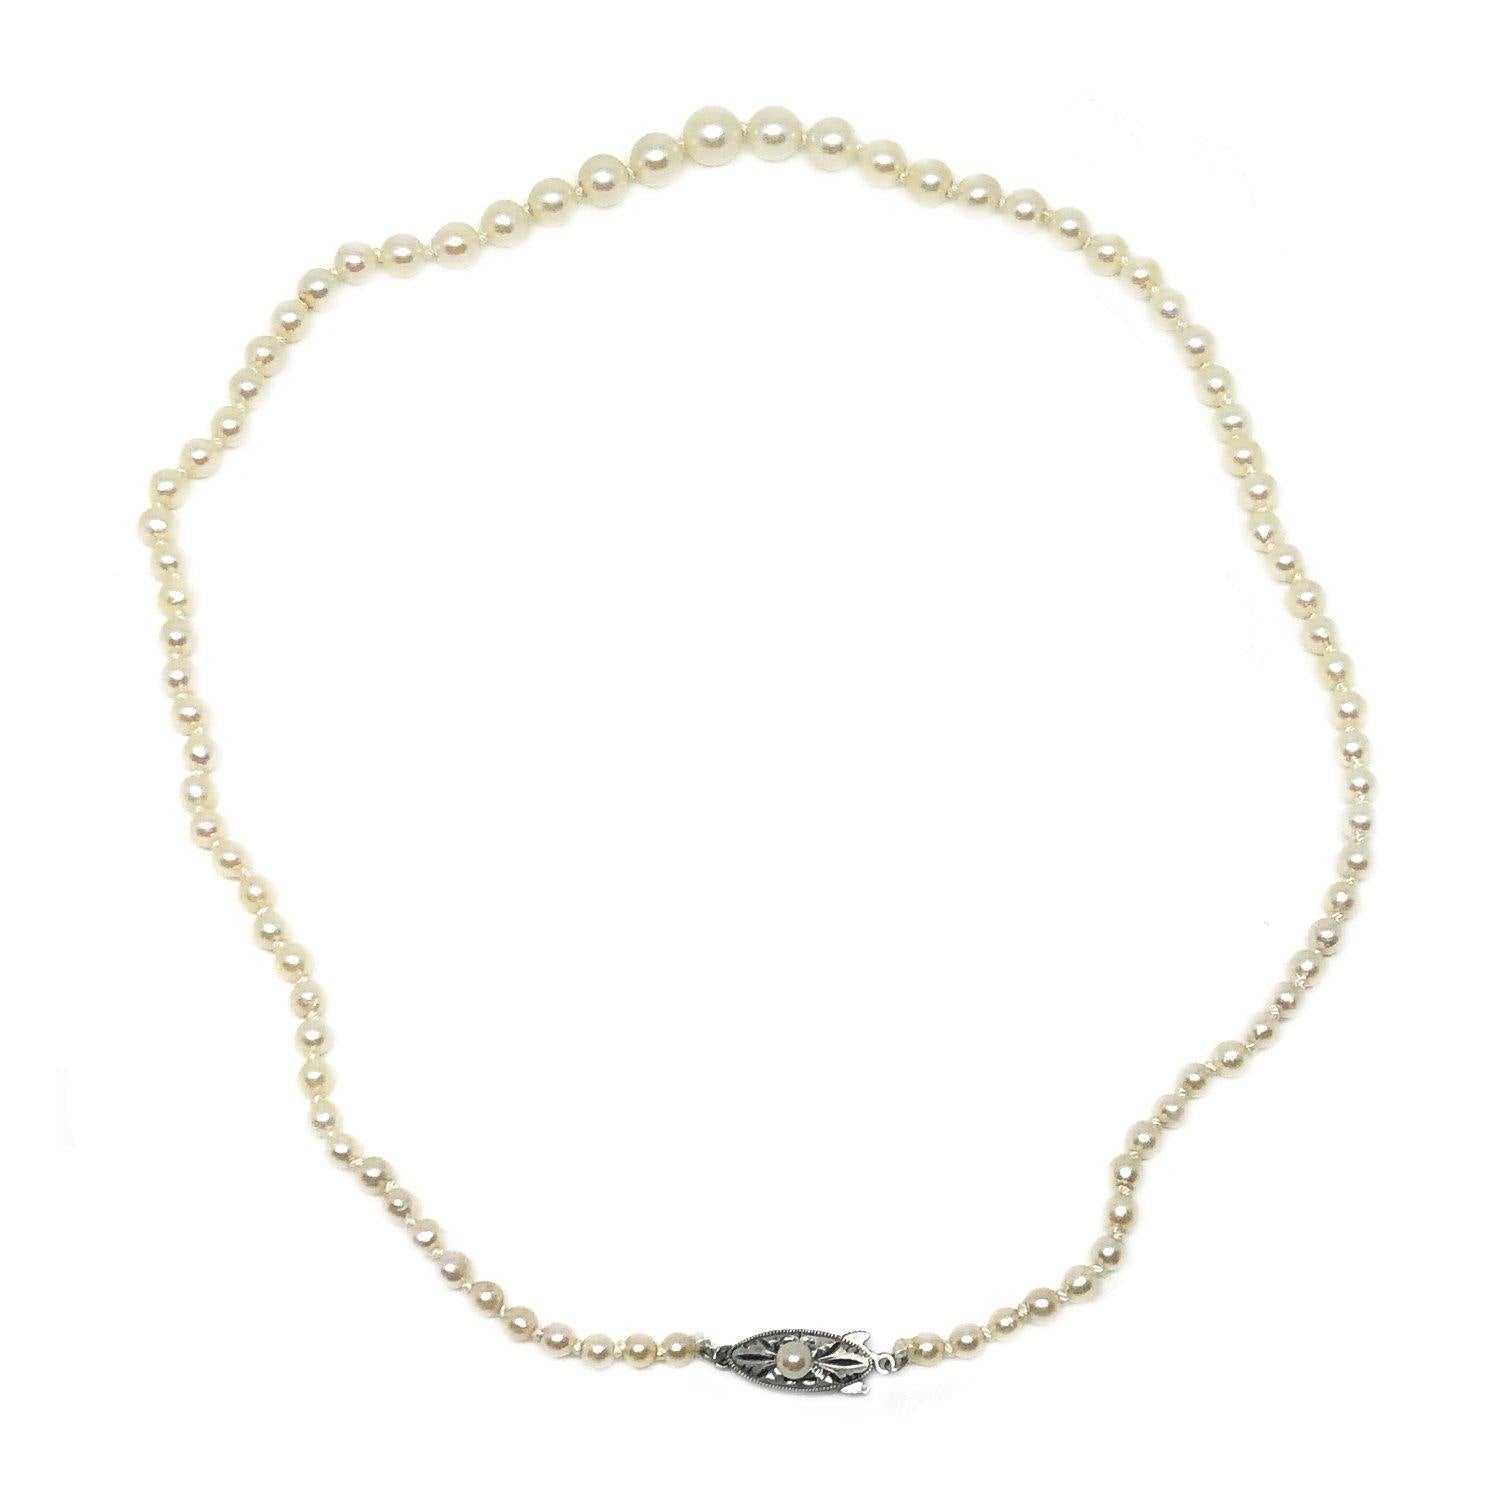 Art Deco Milgrain Japanese Saltwater Cultured Akoya Pearl Graduated Necklace - Sterling Silver 18 Inch